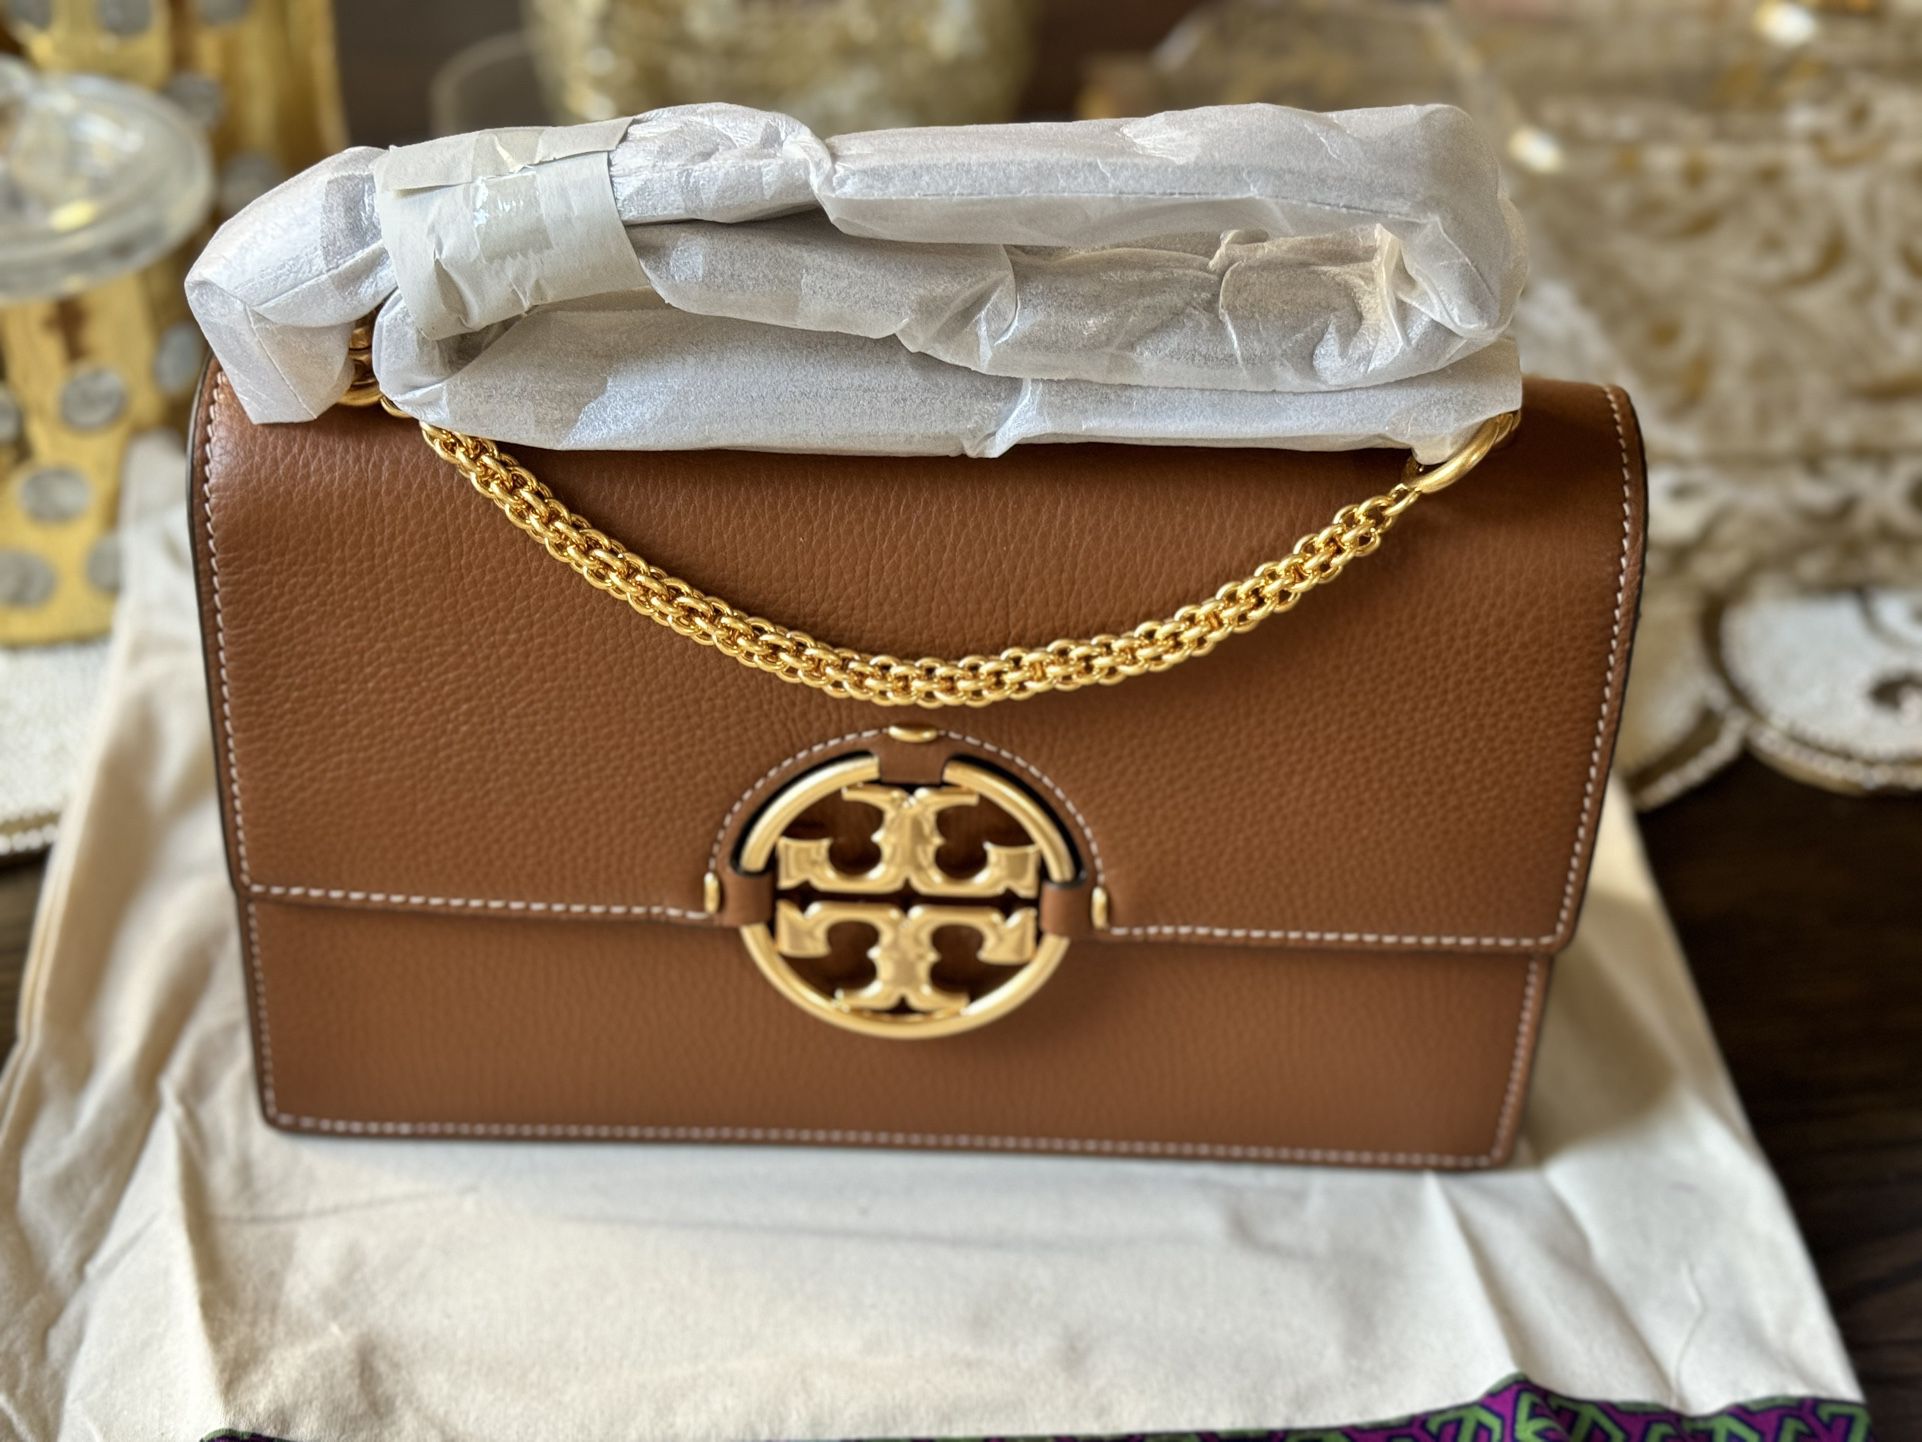 Brand New Authentic Tory Burch Shoulder Bag